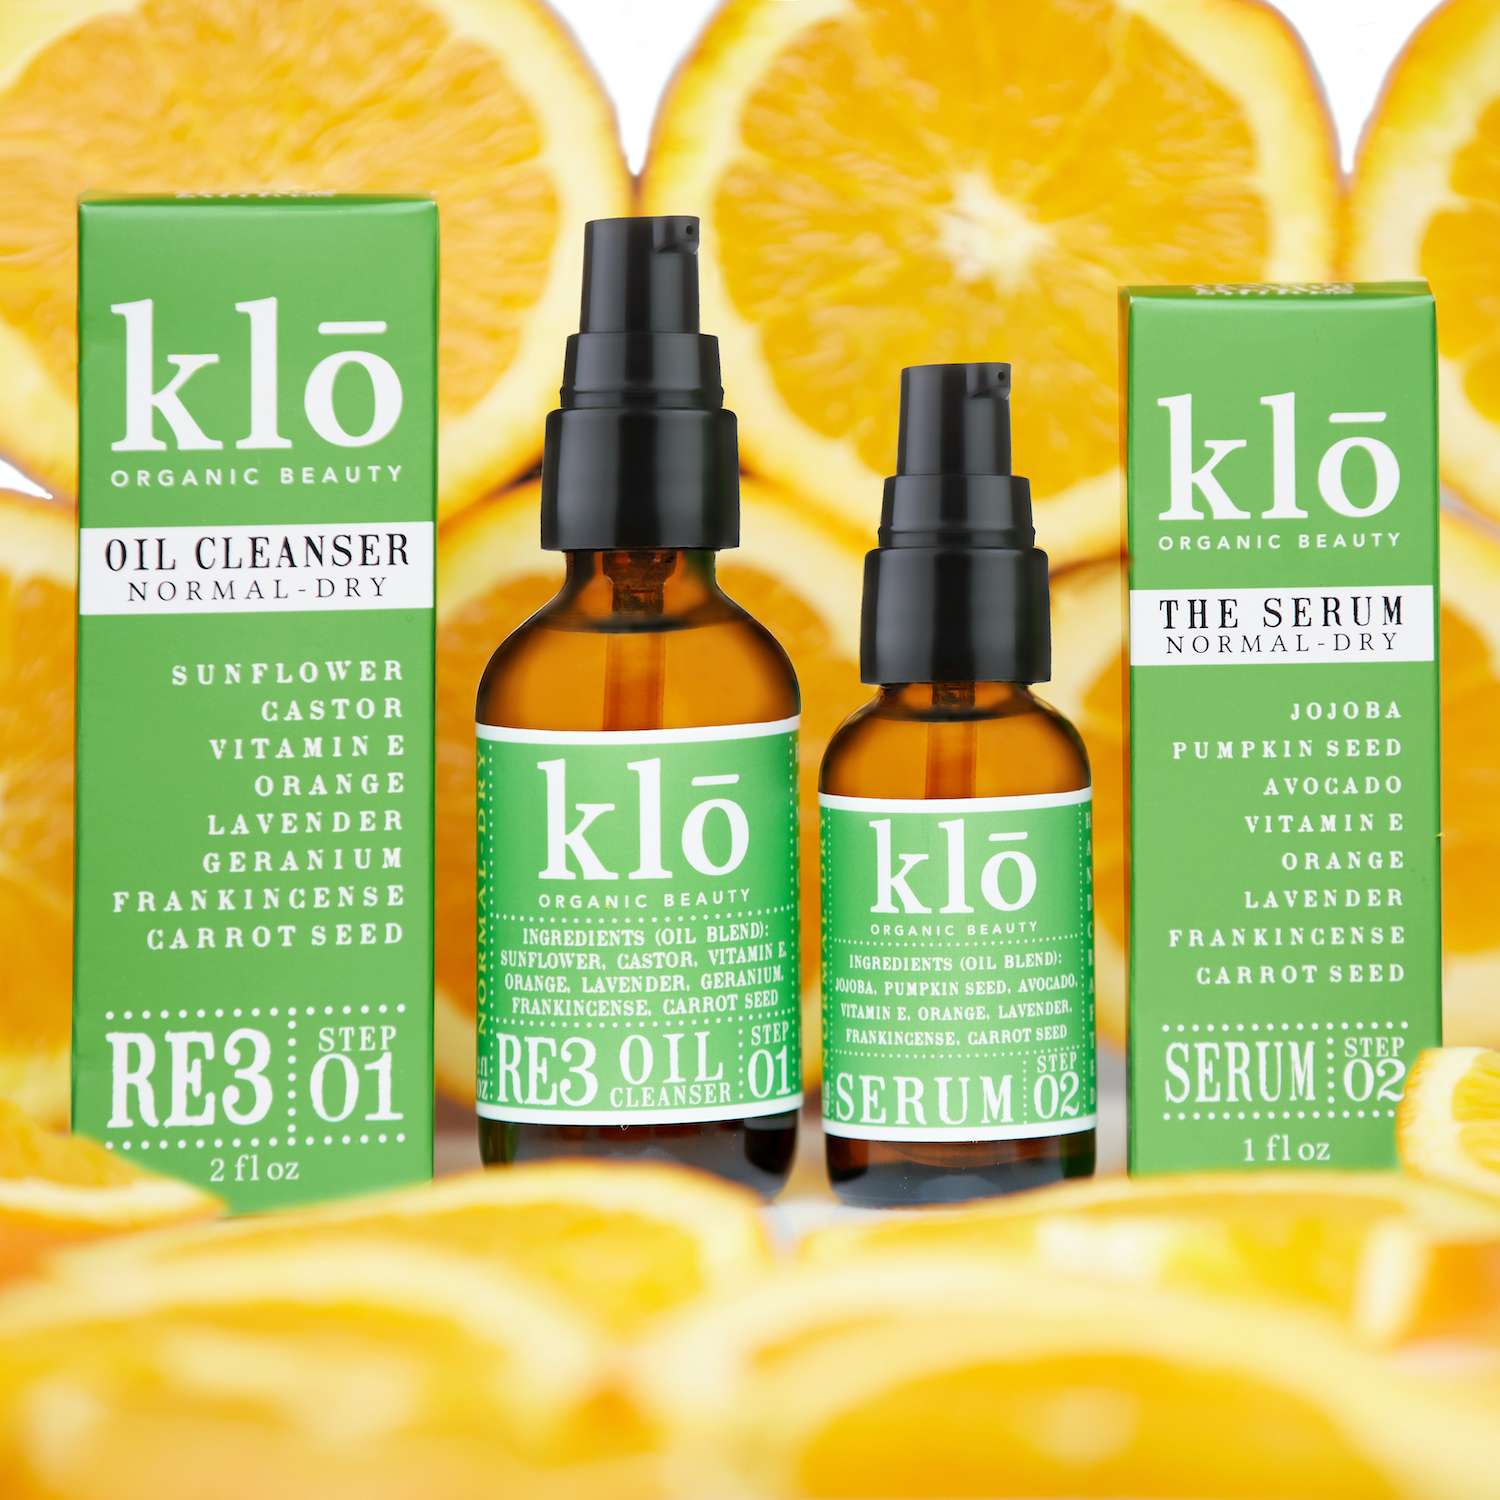 Klo Organic Beauty RE3 oil cleanser and serum for normal-dry skin duo with cut up citrus.